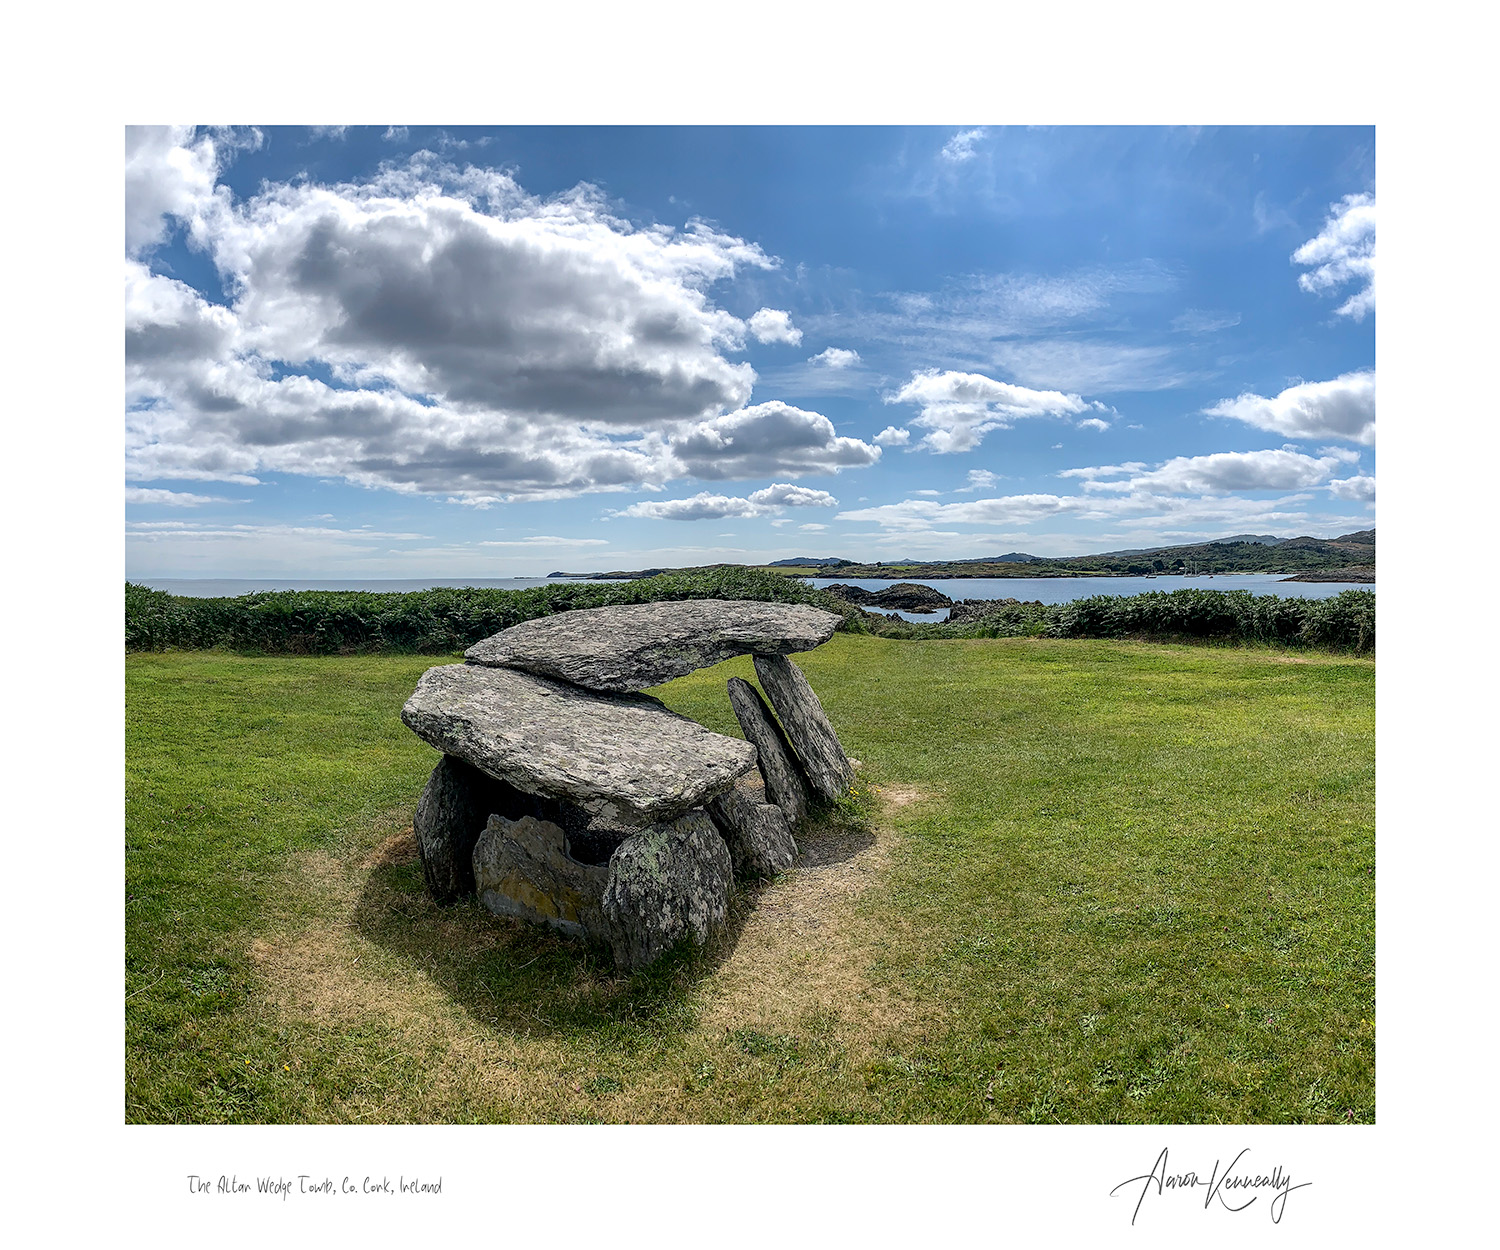 The Altar Wedge Tomb, Co. Cork